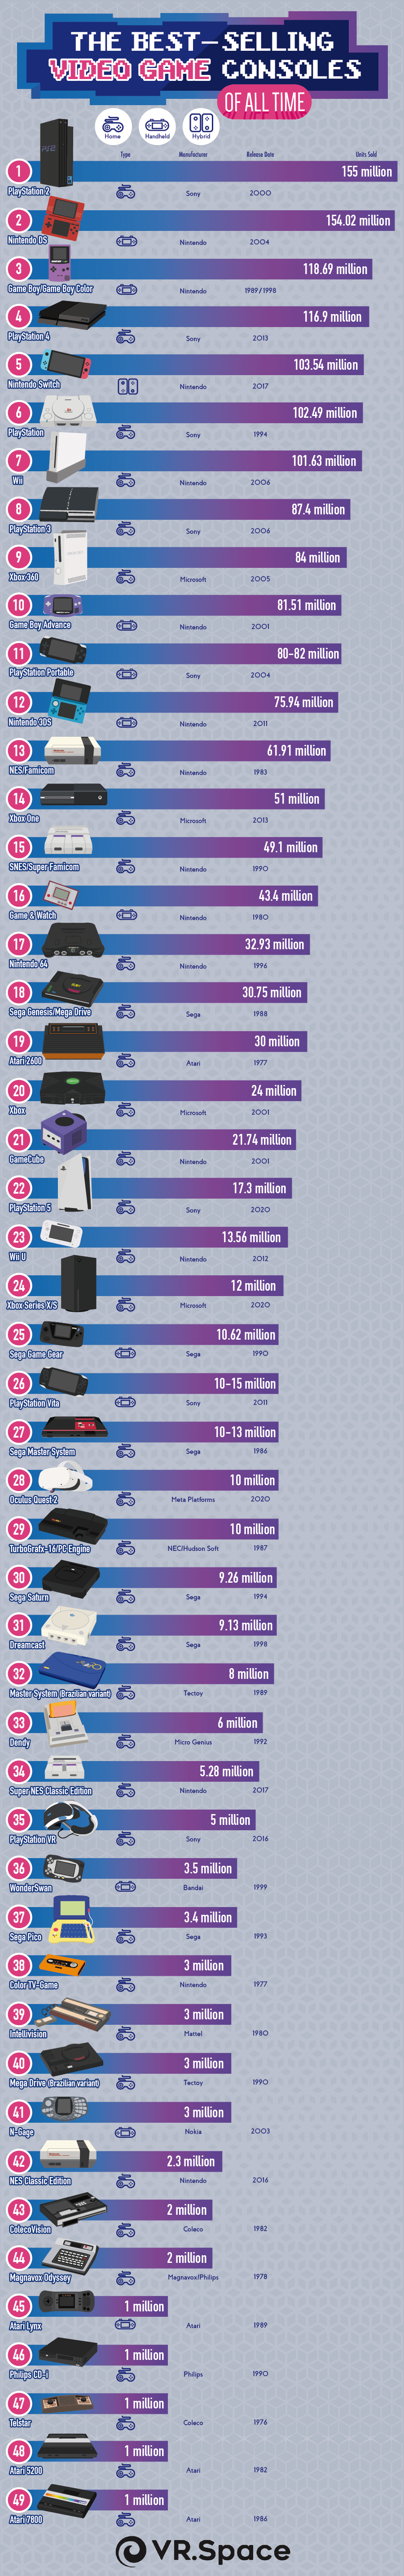 The Best-Selling Video Game Consoles of All Time- Infographic